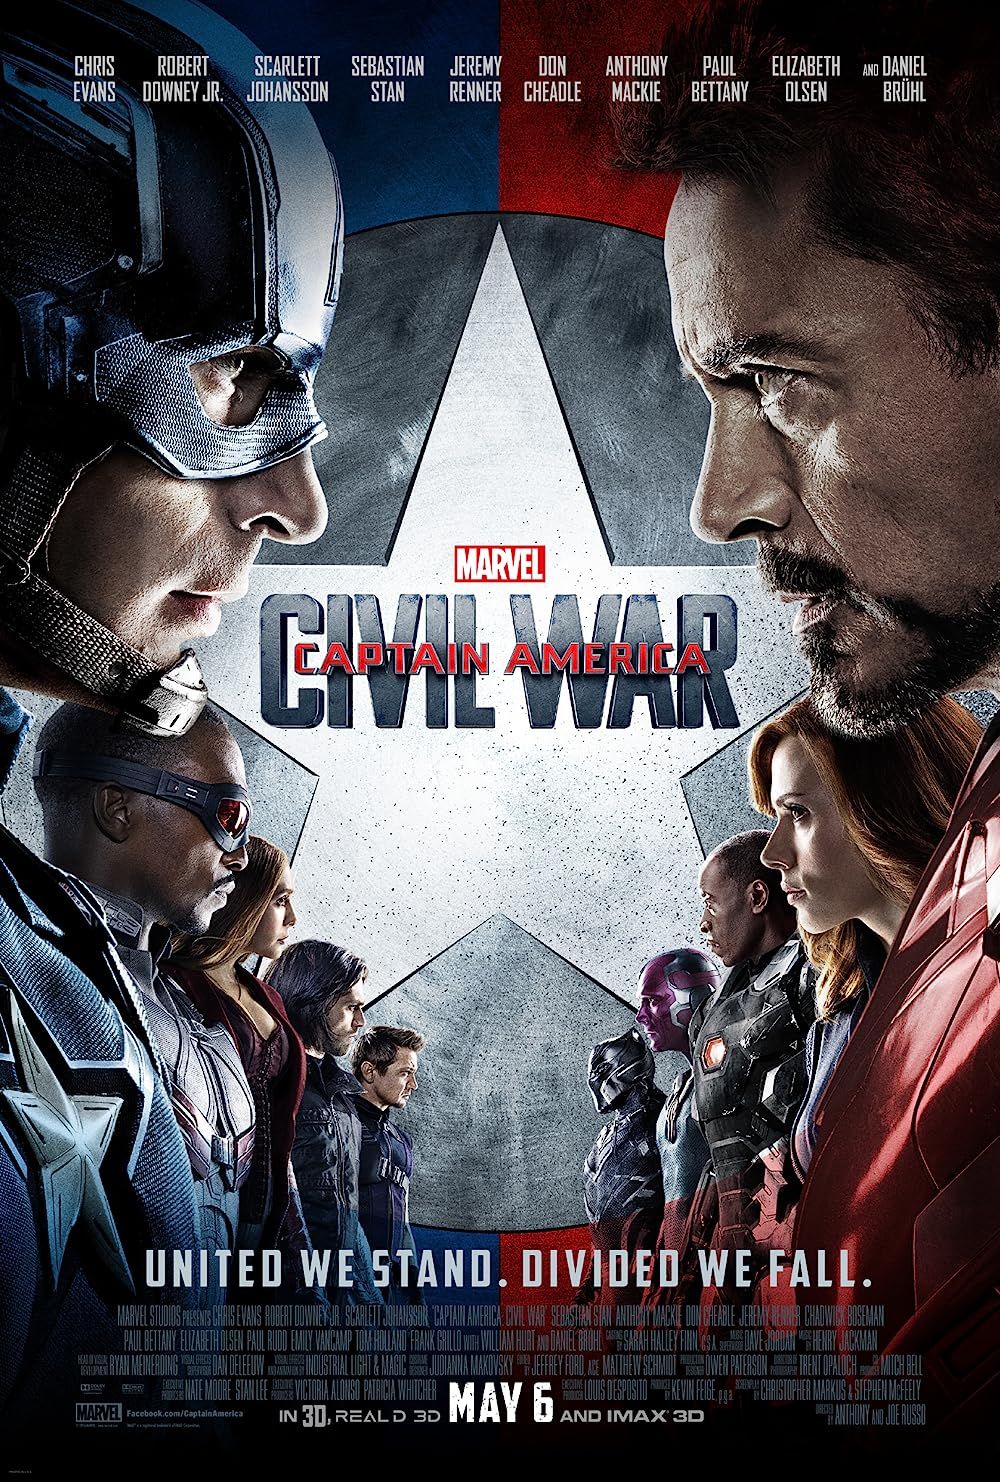 The Avengers face off against each other on the poster for Captain America Civil War